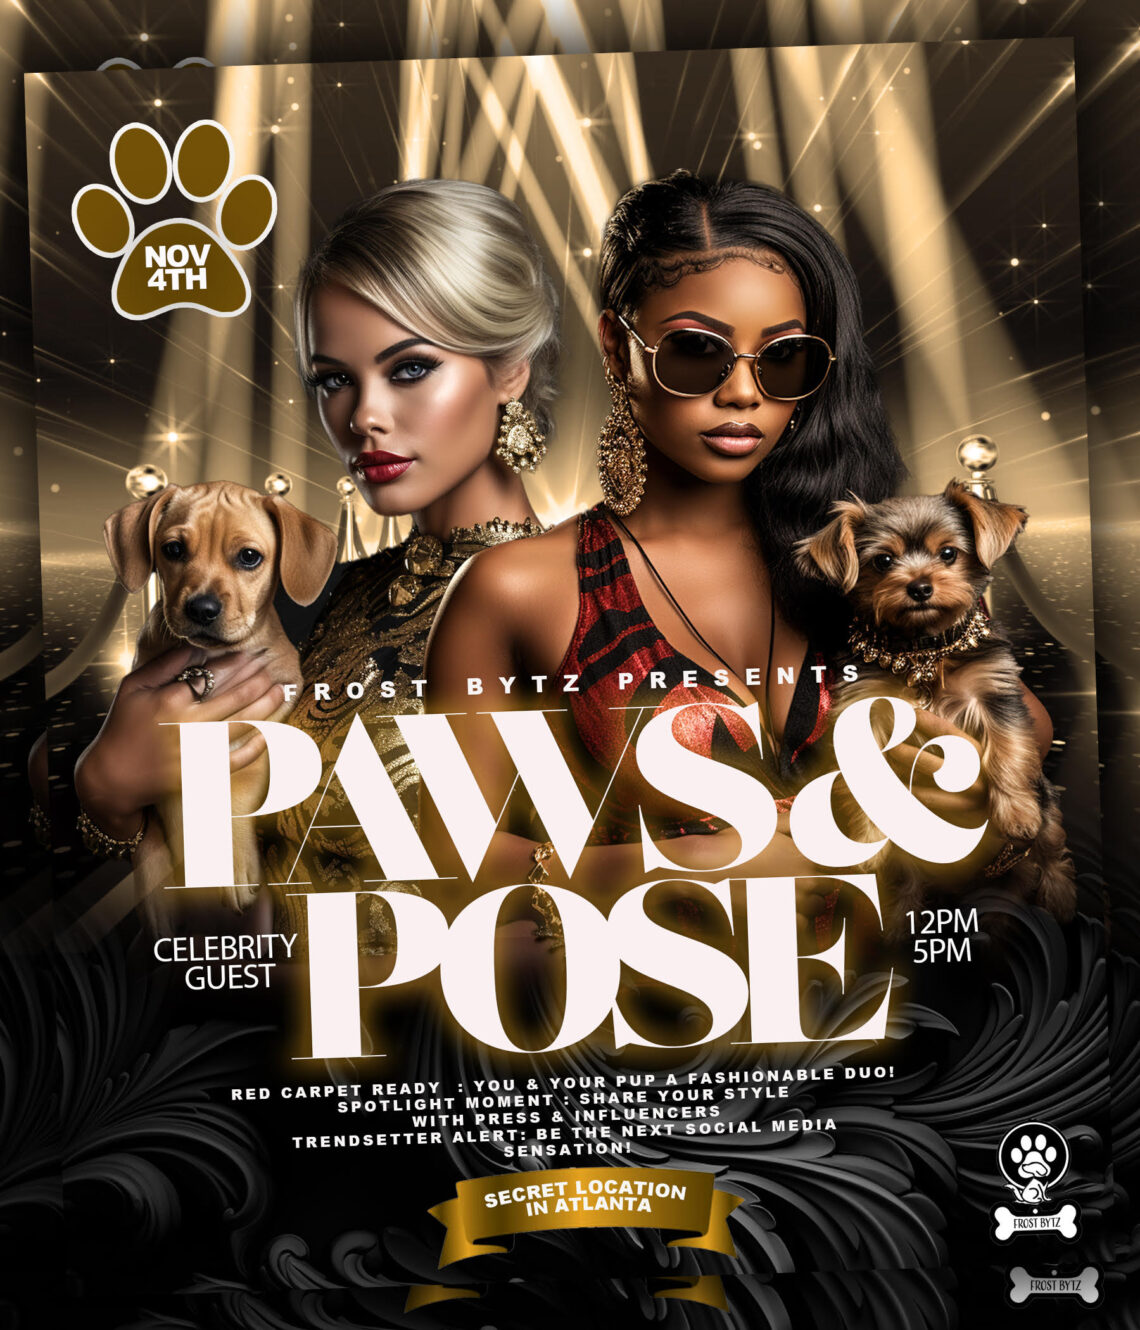 Red Carpet Event Benefitting Canines in Need Comes to Atlanta